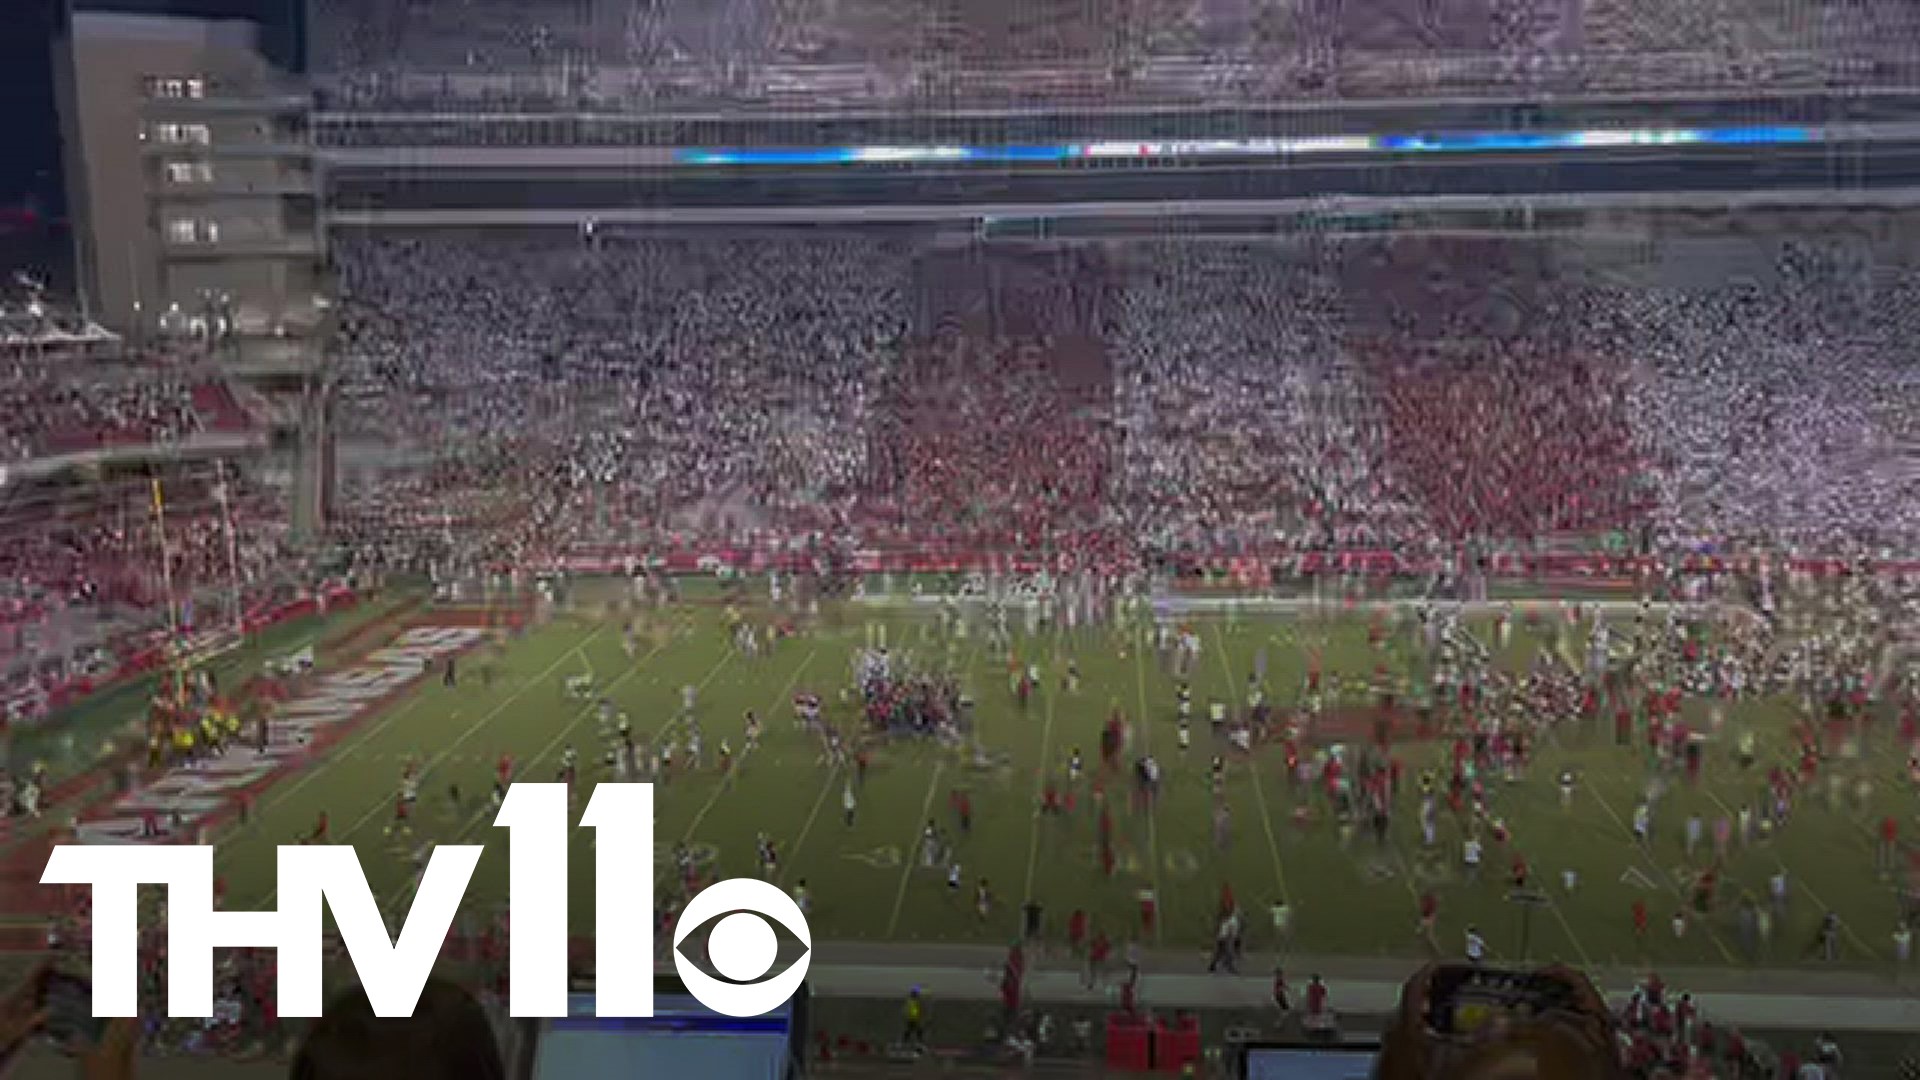 Razorback fans storm the field after Hogs' historic win over Texas!